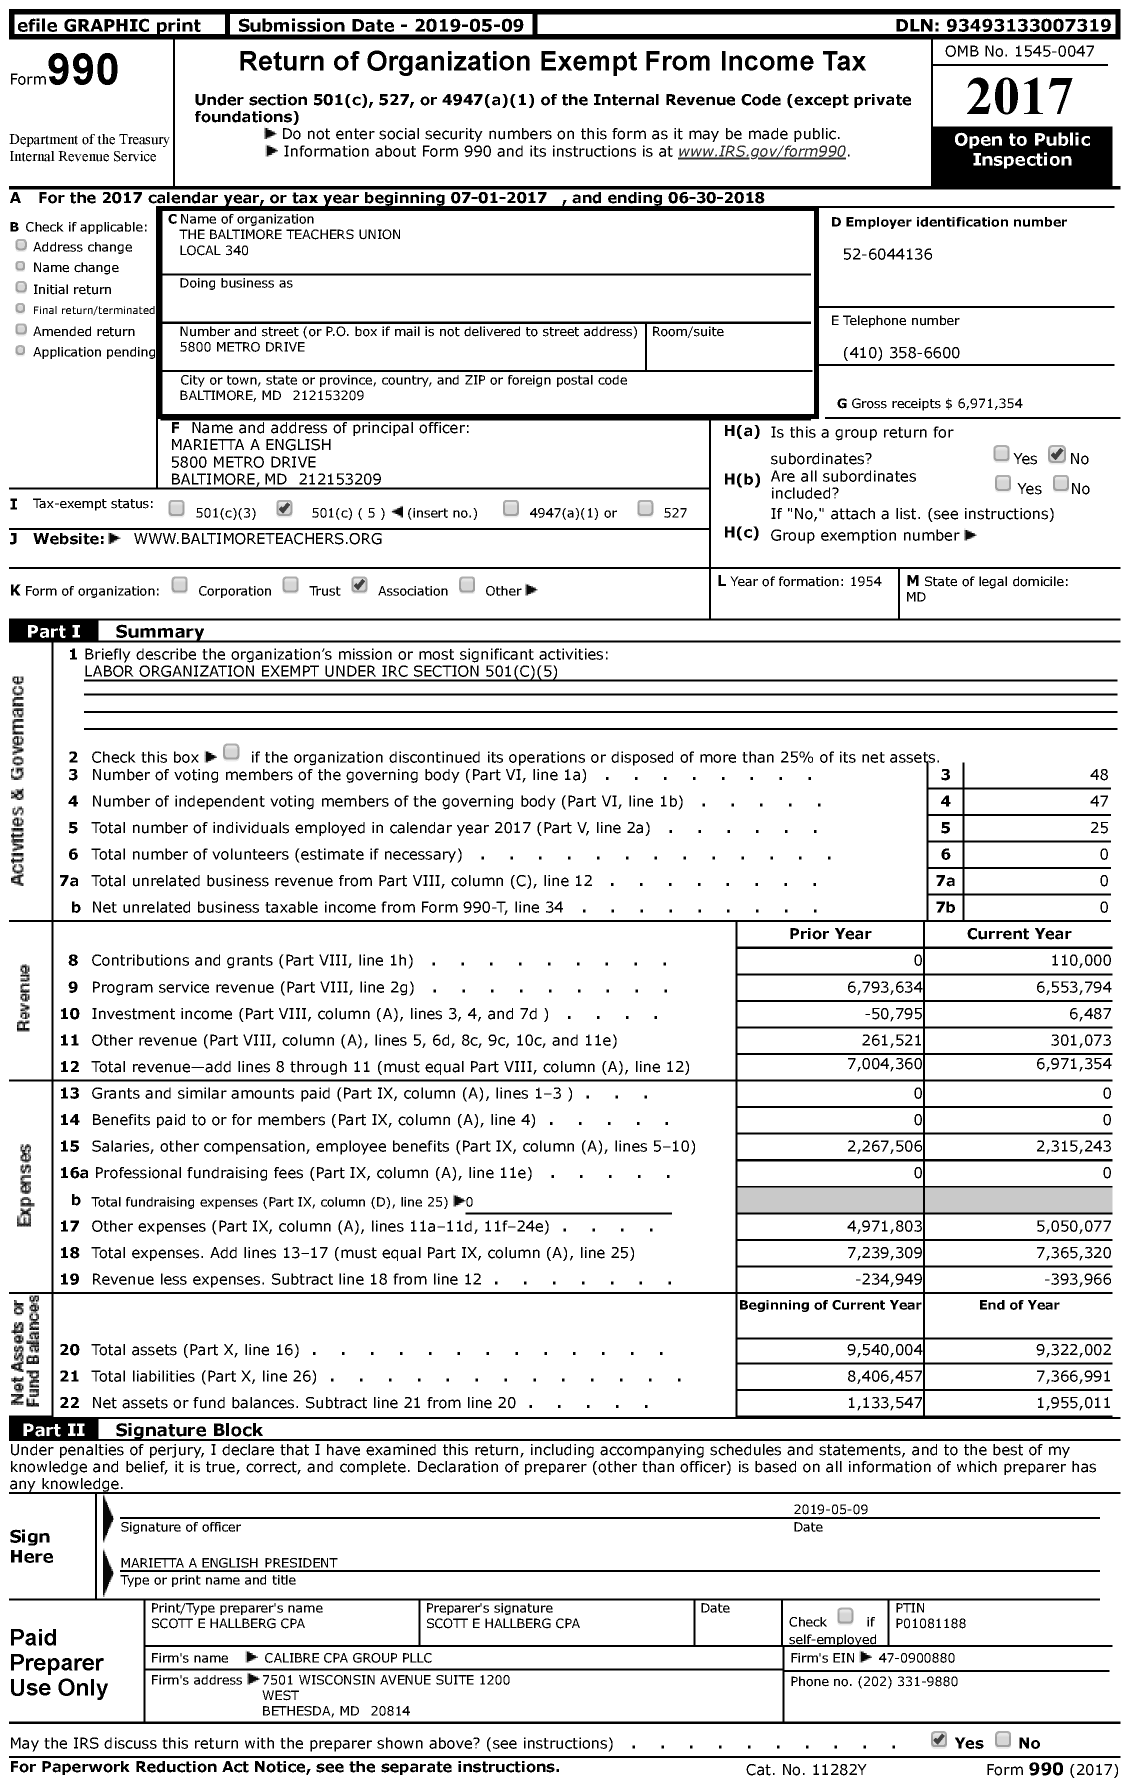 Image of first page of 2017 Form 990 for American Federation of Teachers - 0340 Baltimore Teachers Union